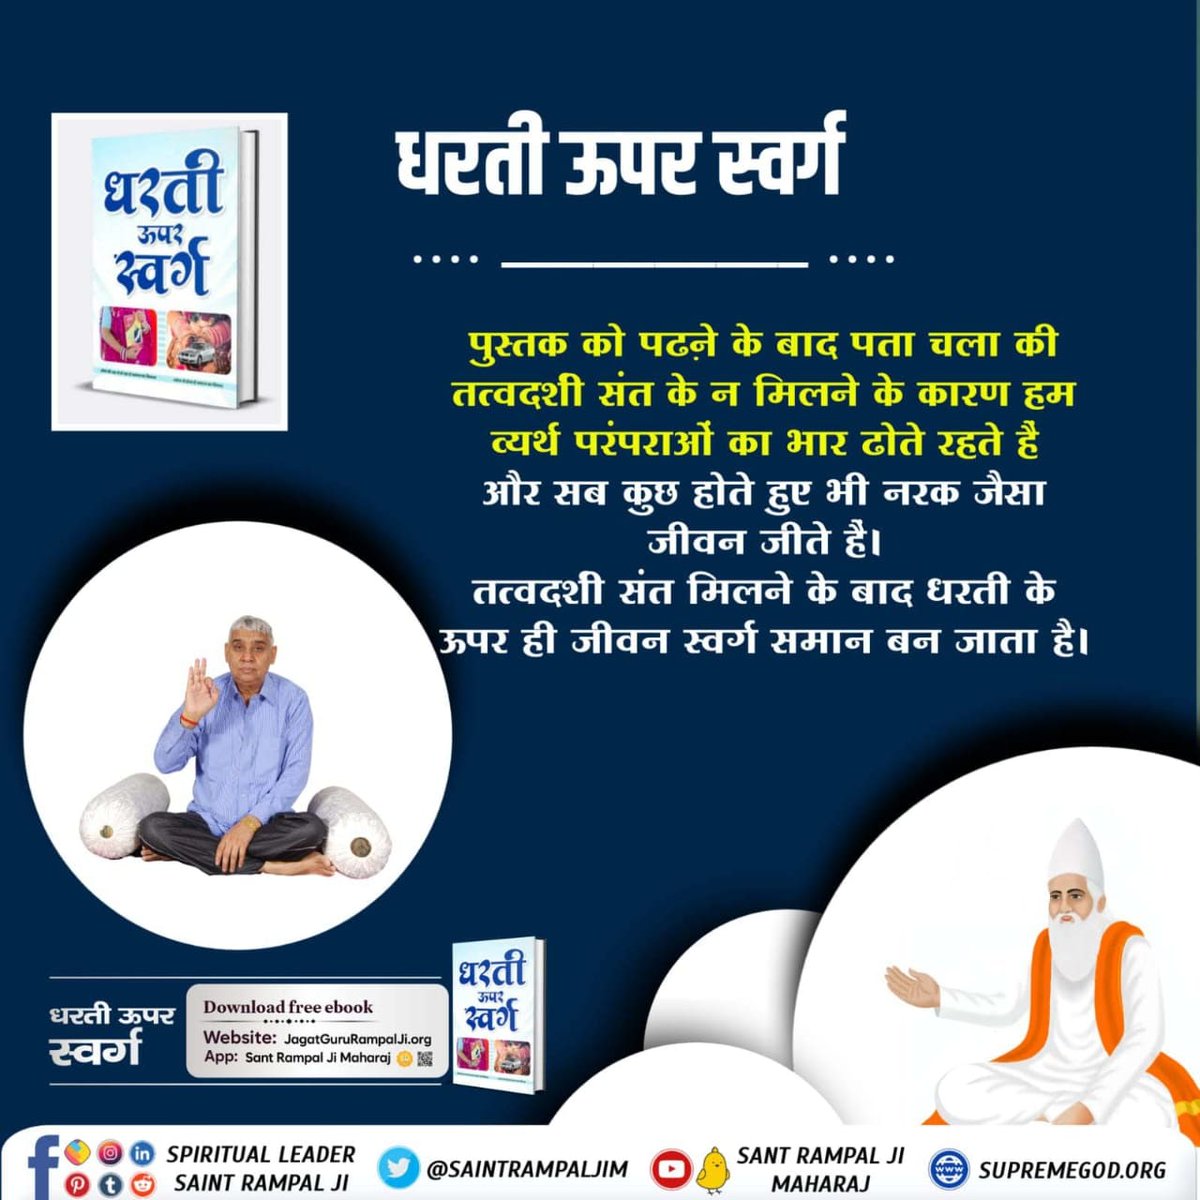 #धरती_को_स्वर्ग_बनाना_है
Heaven on Earth
It is obligatory to constantly keep practicing in the satsang of......?
sant Rampal Ji Maharaj,